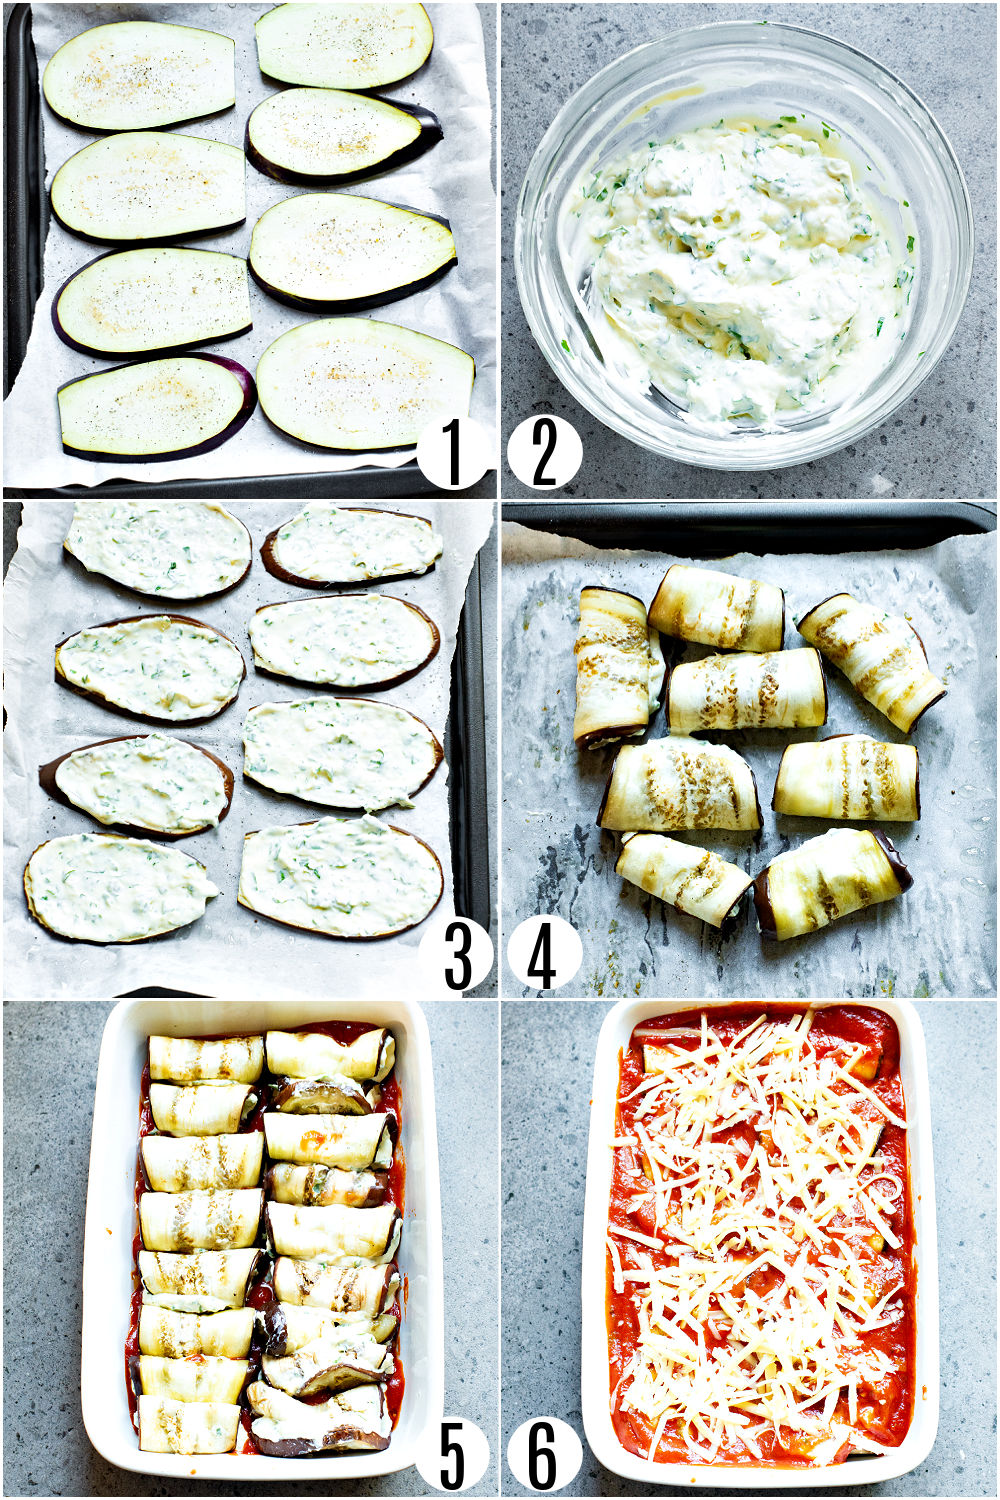 Step by step photos showing how to make eggplant rollatini.